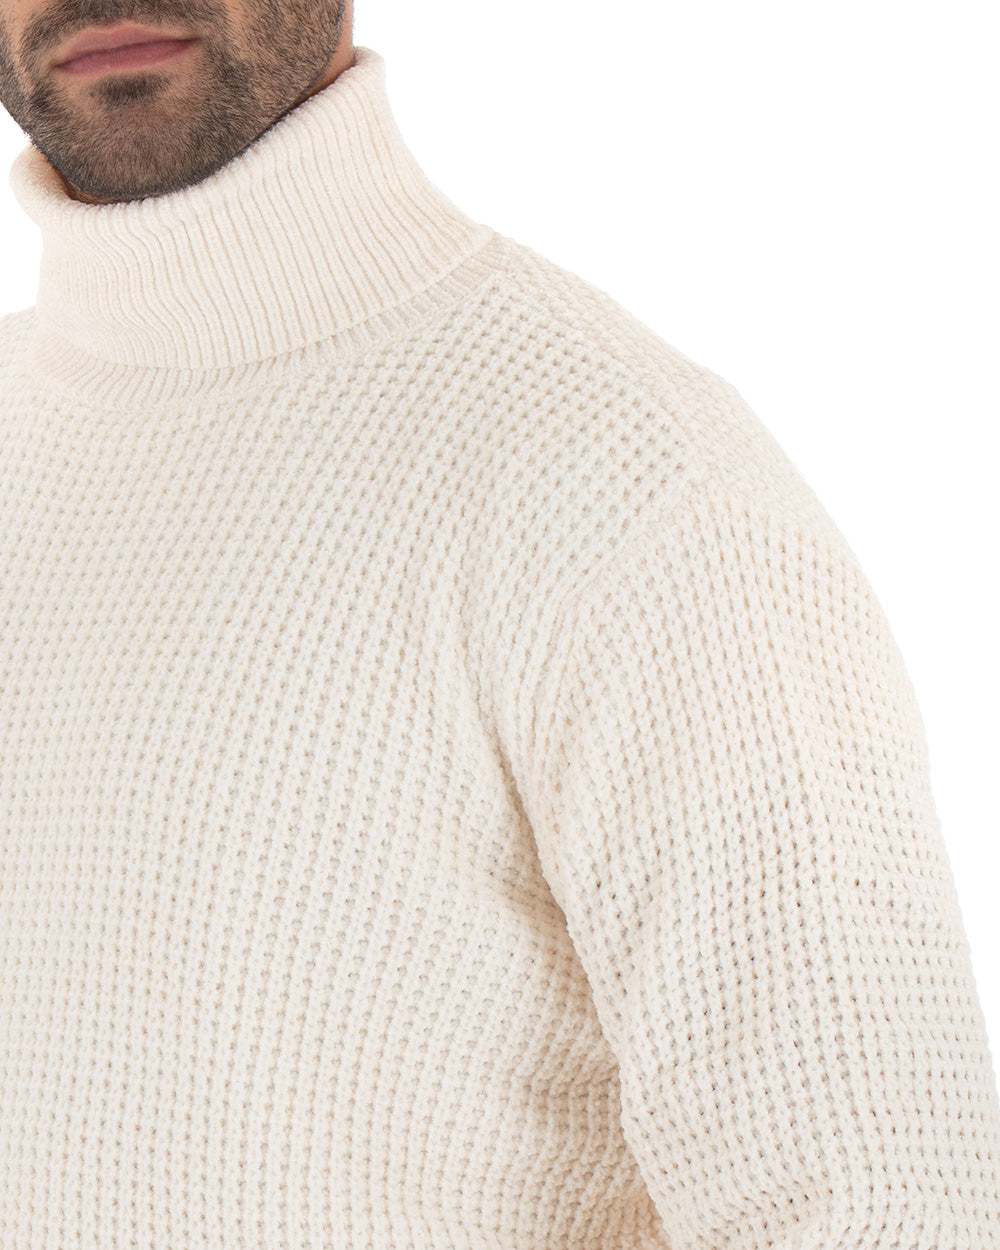 Men's Long Sleeved Chenille Sweater Solid Color Cream High Neck GIOSAL